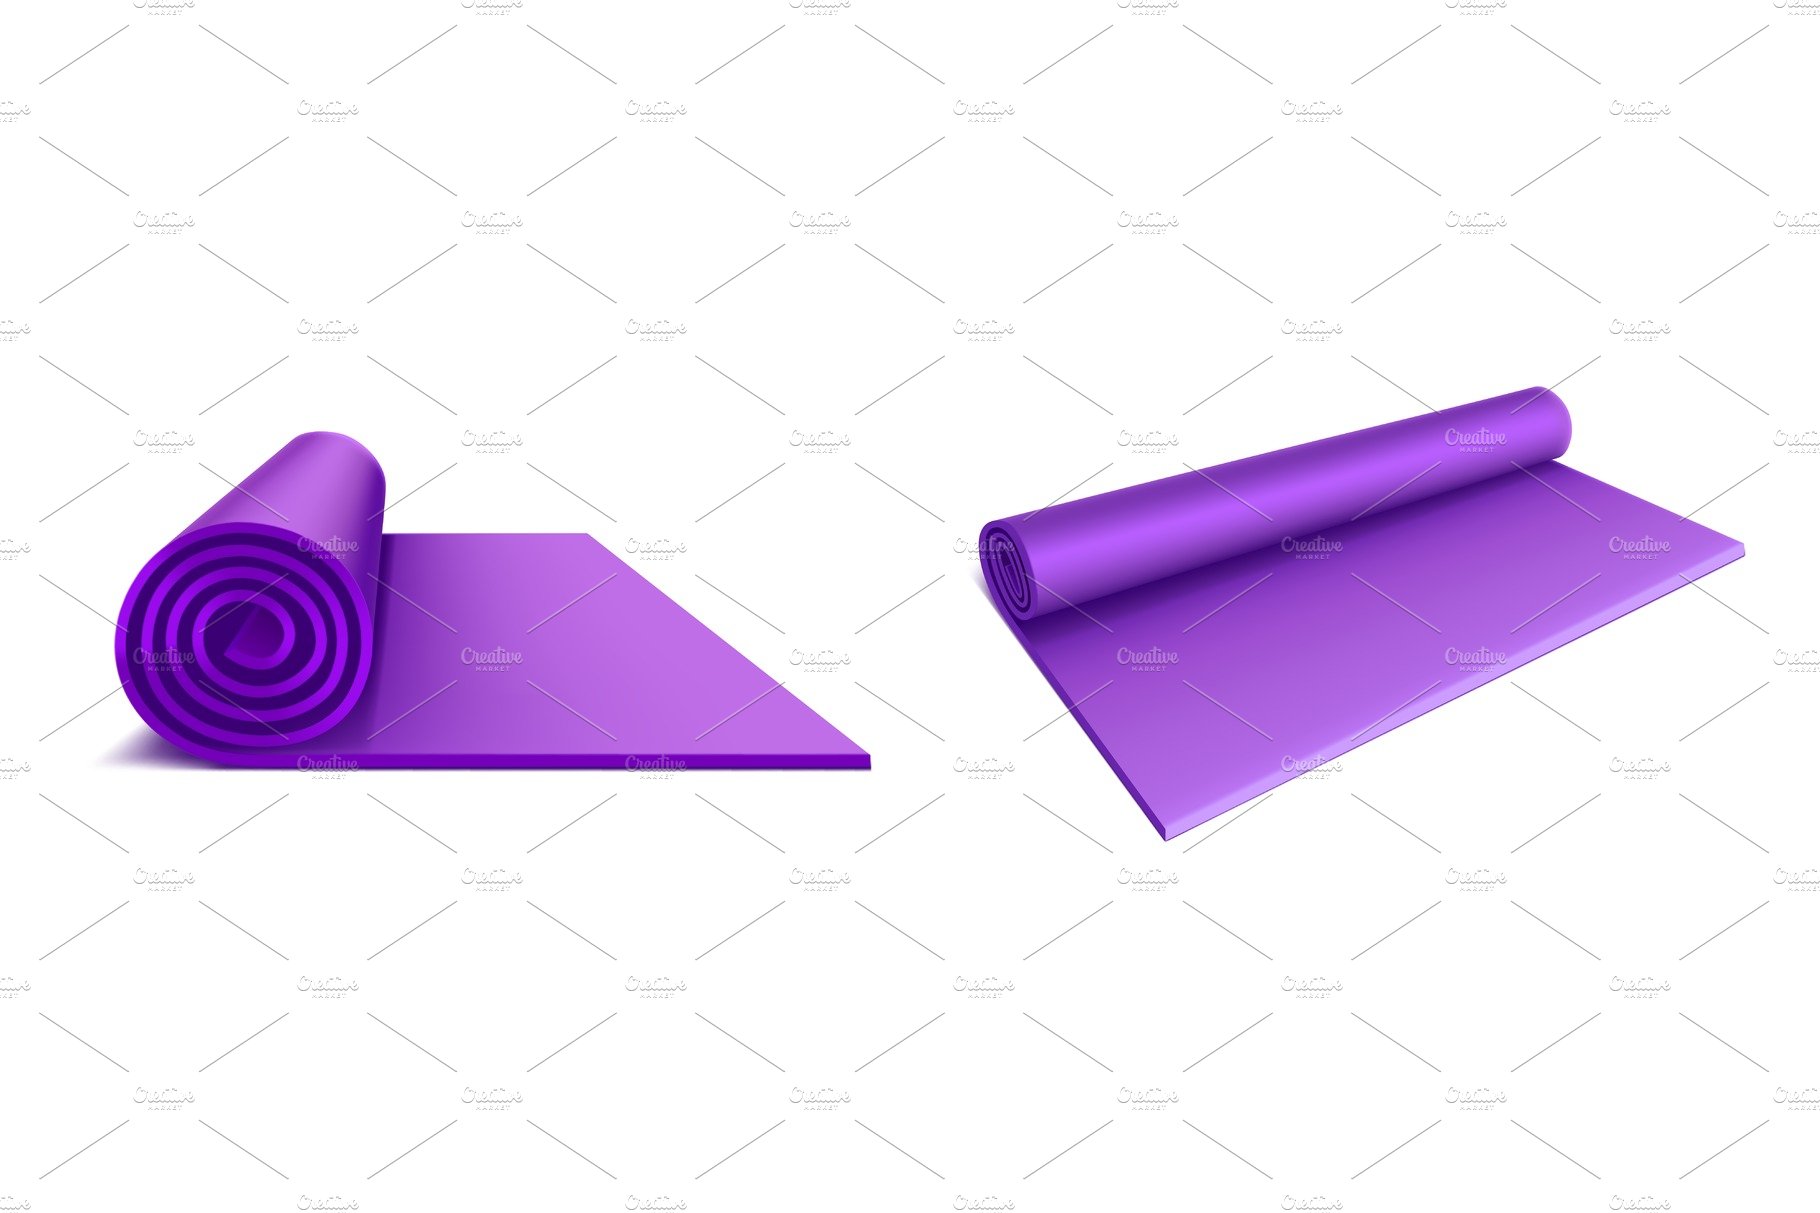 Yoga mat top and side view, purple cover image.